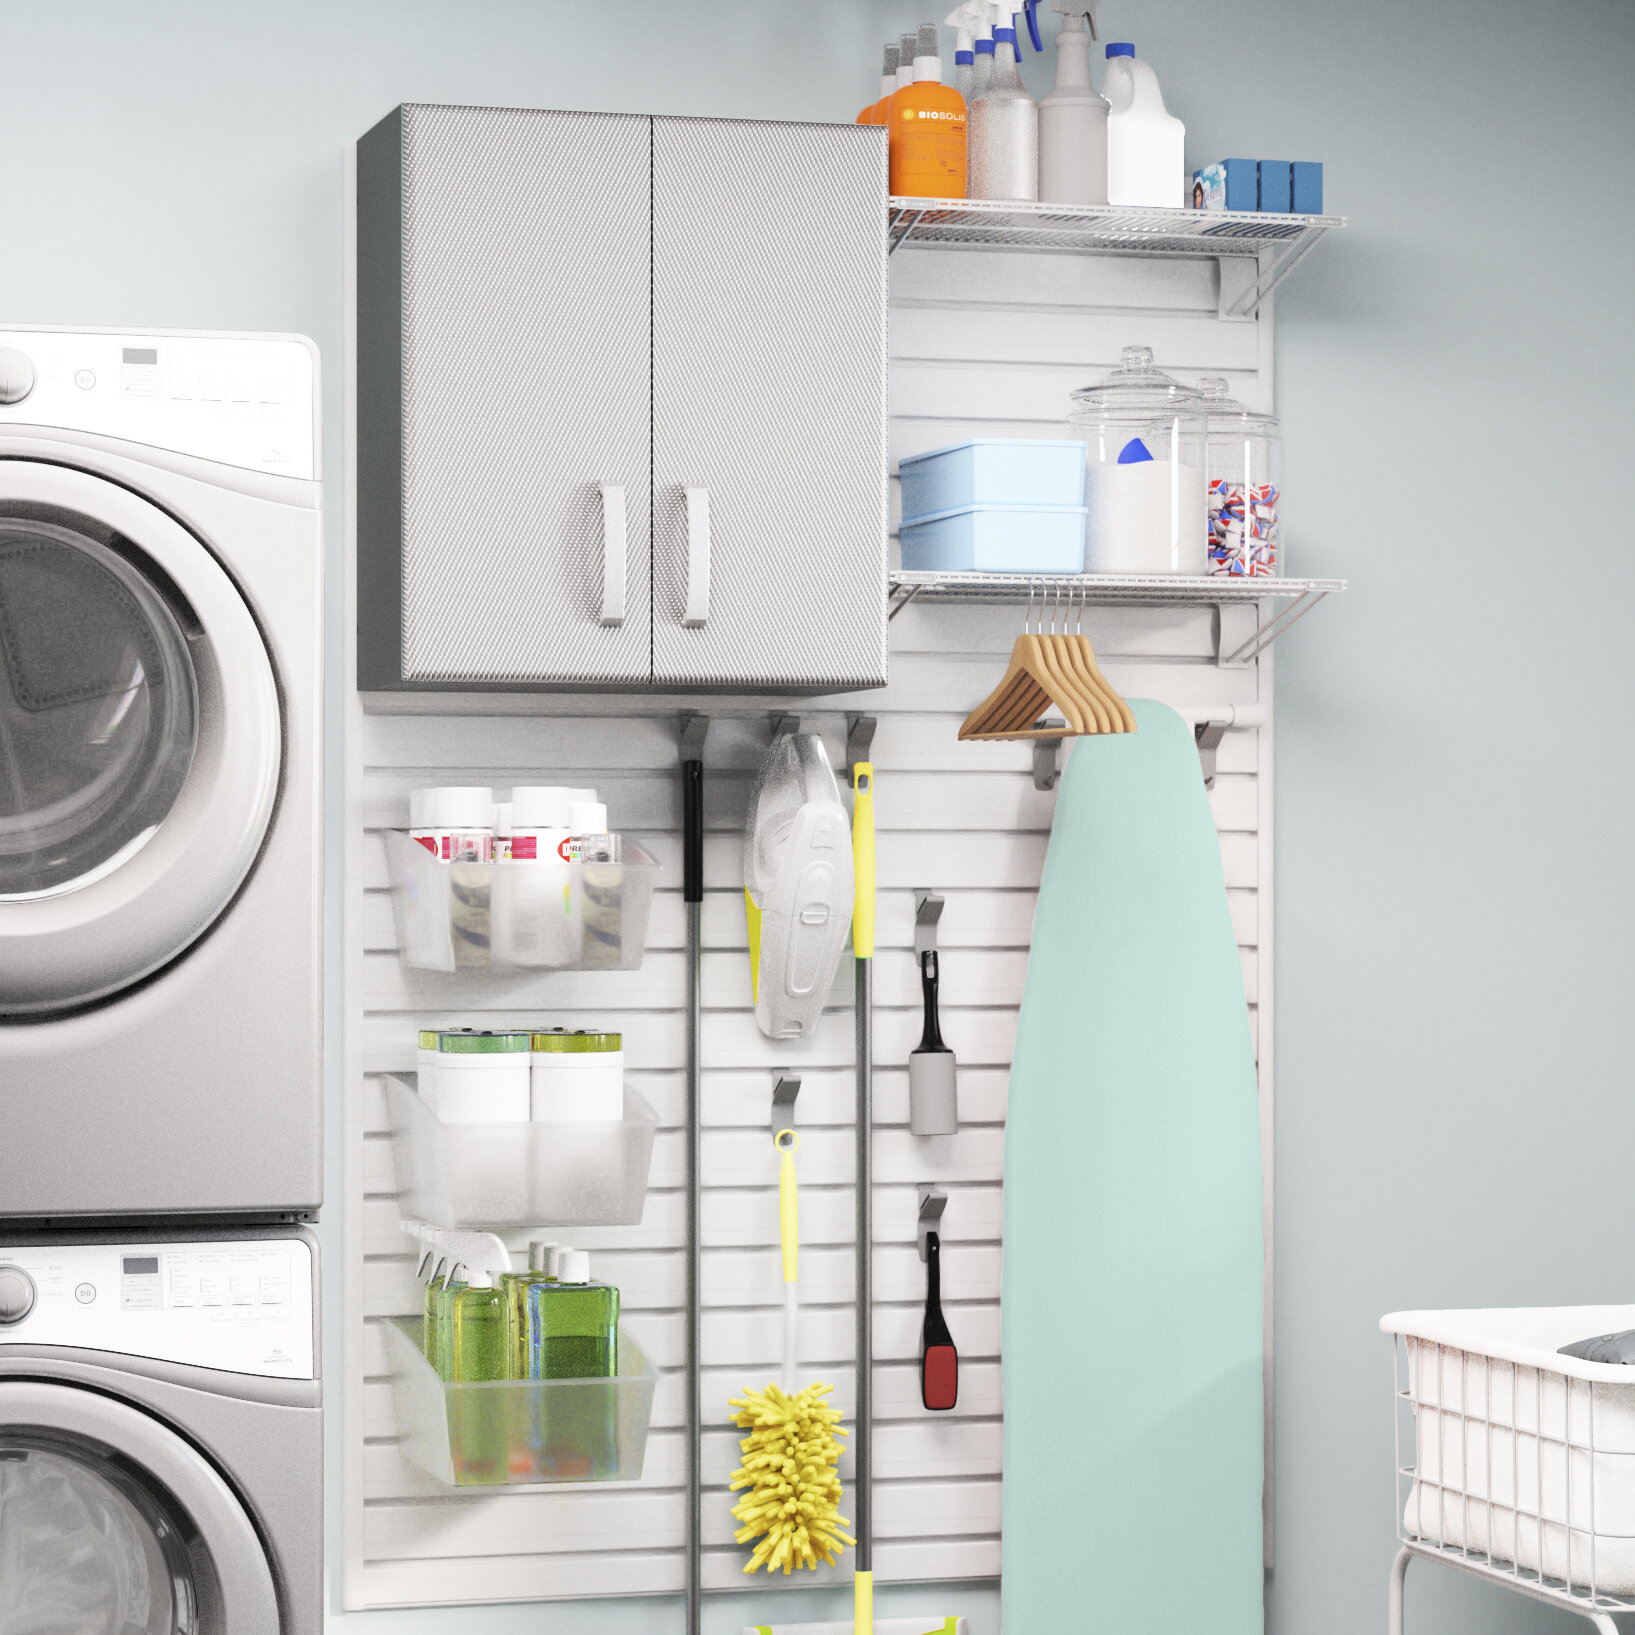 Wall-Mounted Drying Rack: Practical Solution for Small Laundry Room